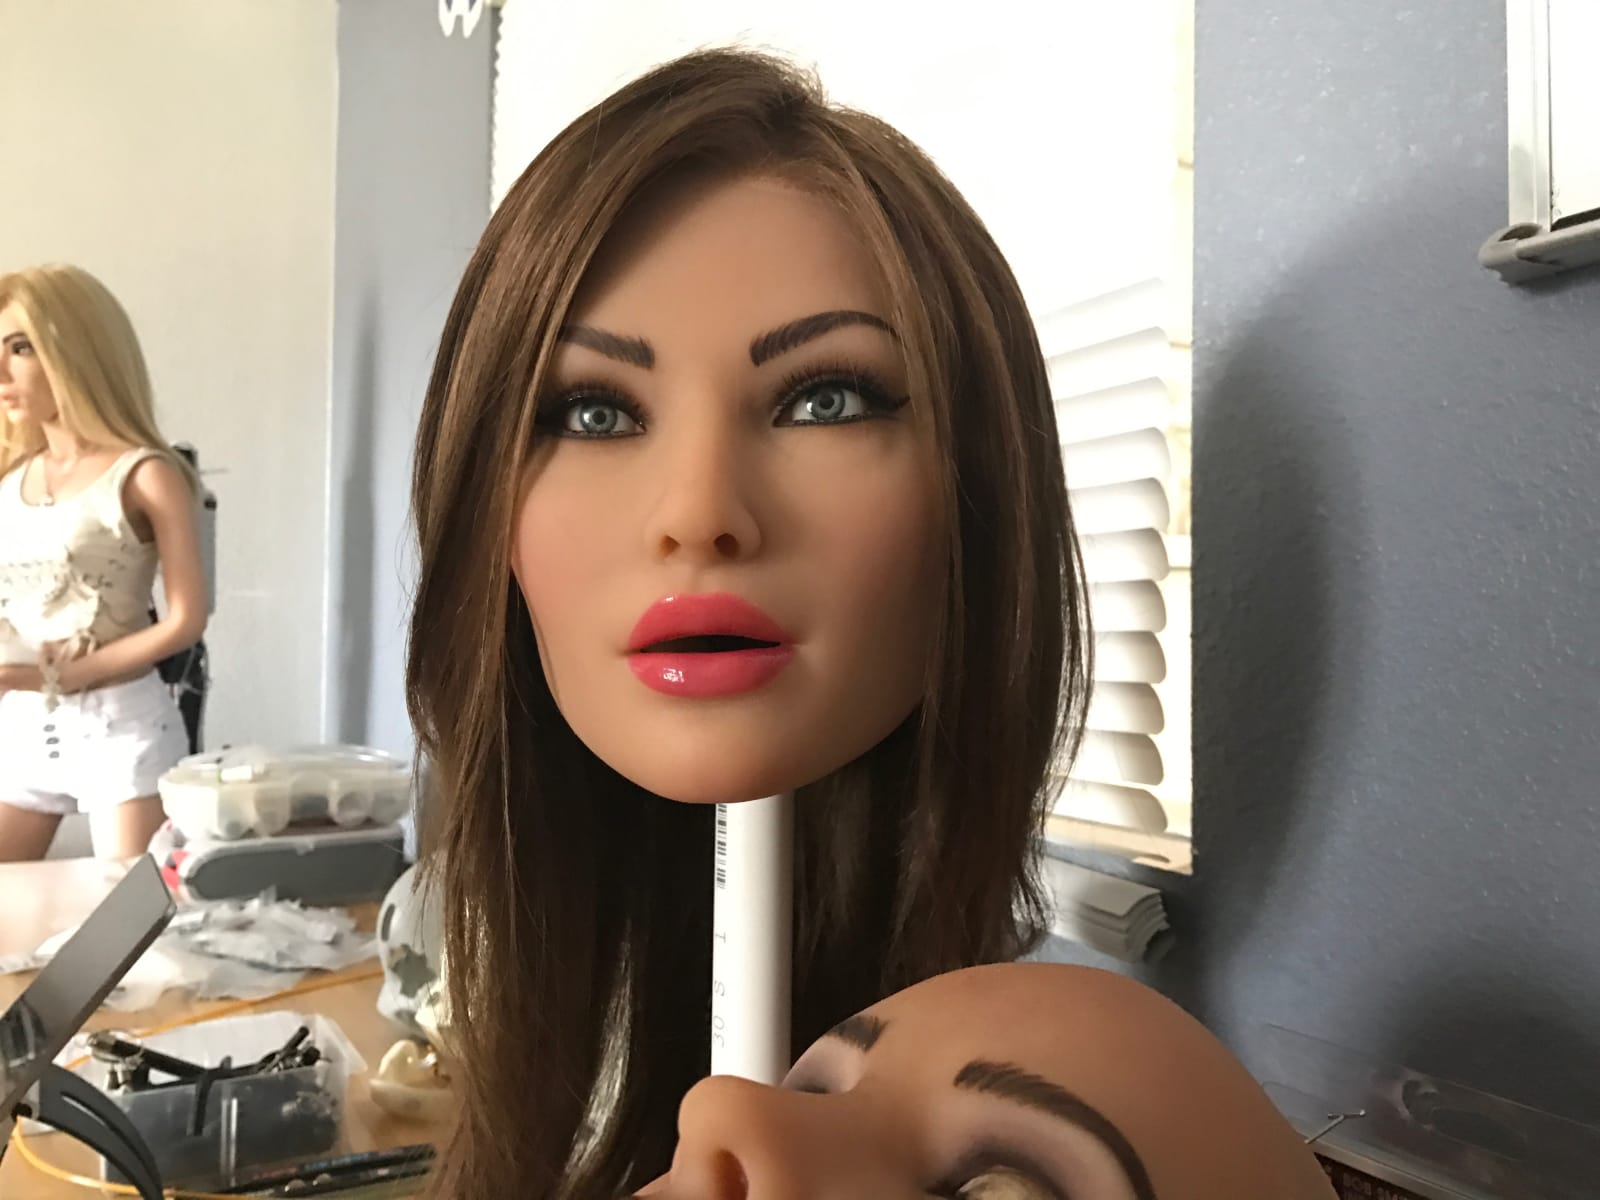 Xxx Hd Seel Peak Blood Sex Videos Com - RealDoll's first sex robot took me to the uncanny valley | Engadget